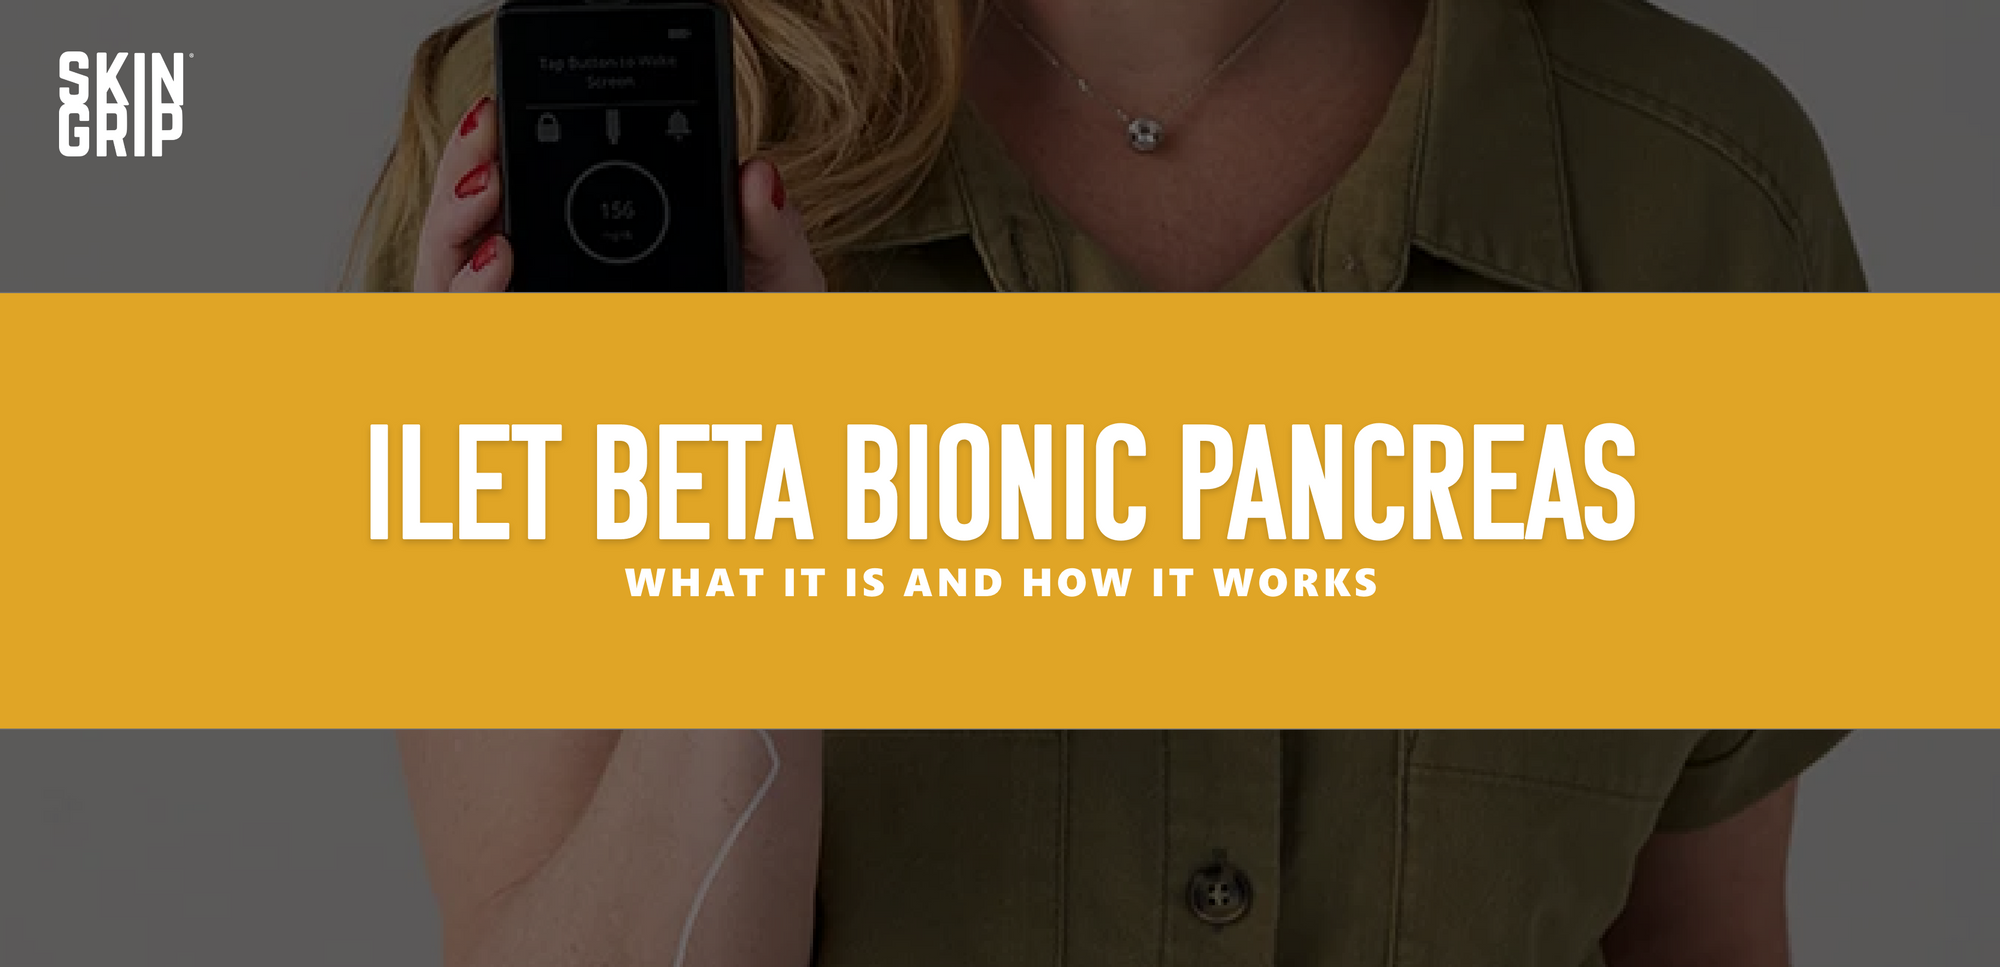 iLet Beta Bionic Pancreas: What it is and How it works